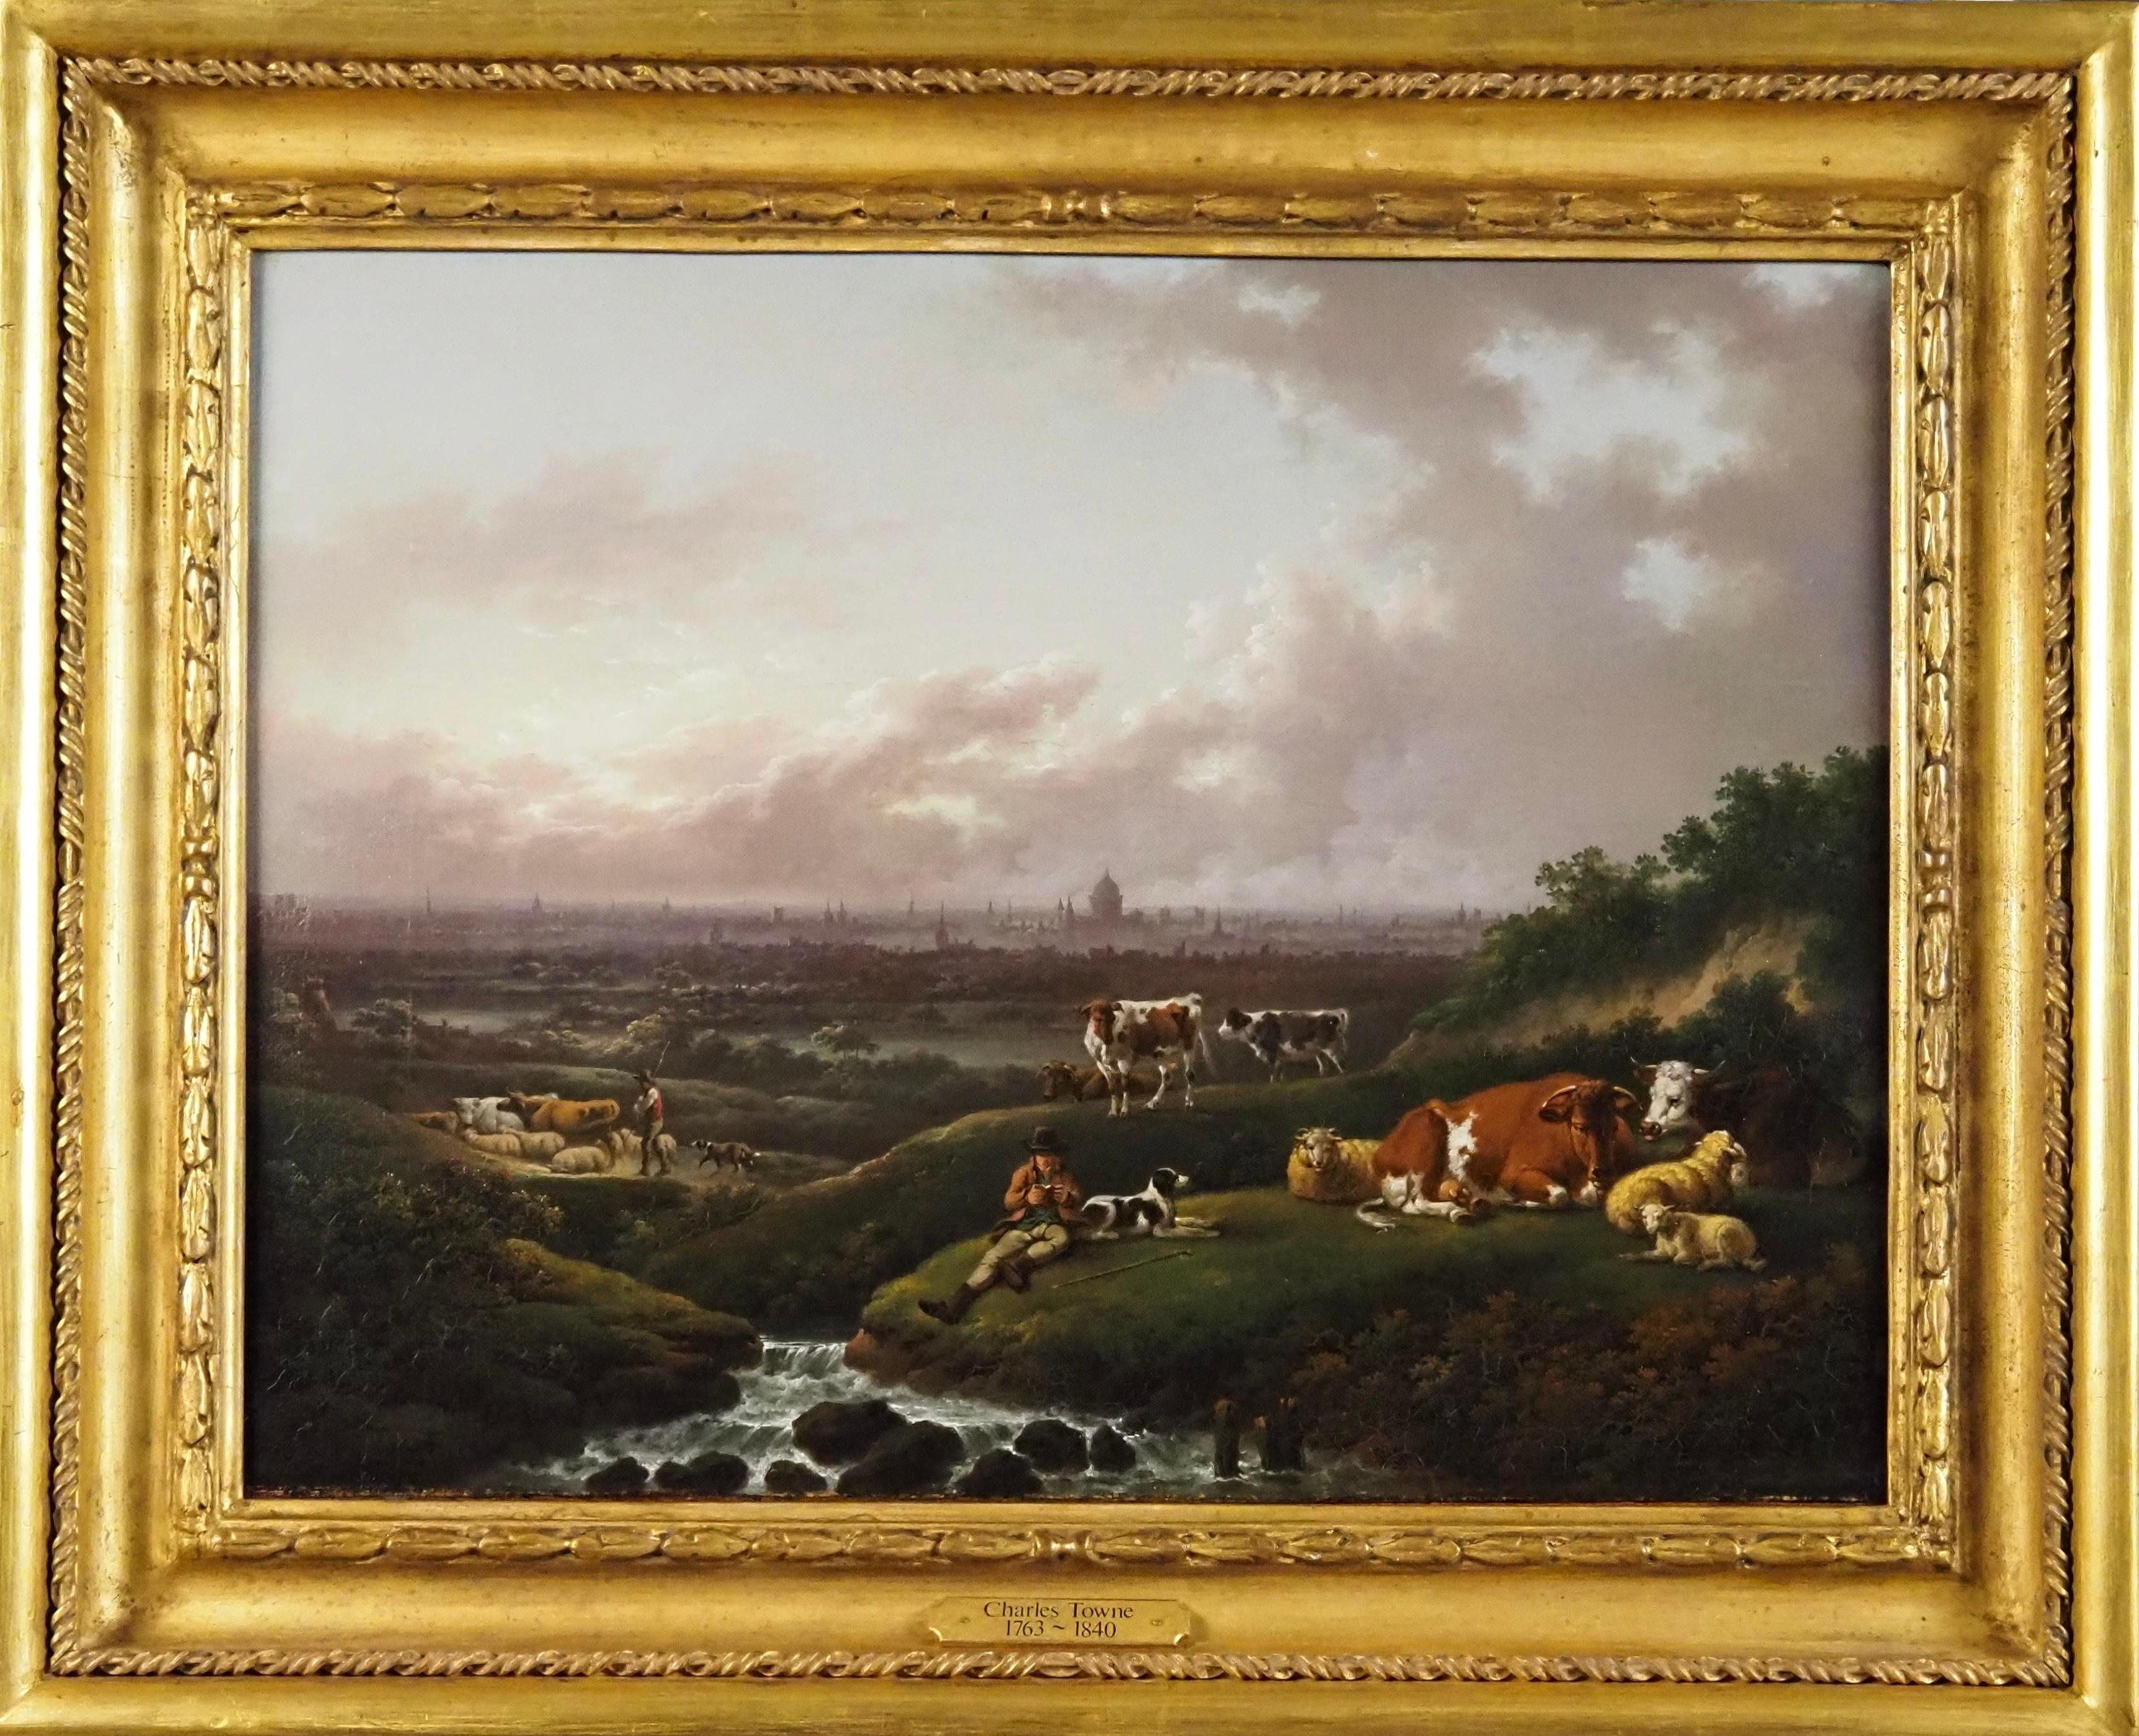 Charles Towne Landscape Painting - London : A distant view of the city from the south with a herdsman and cattle 